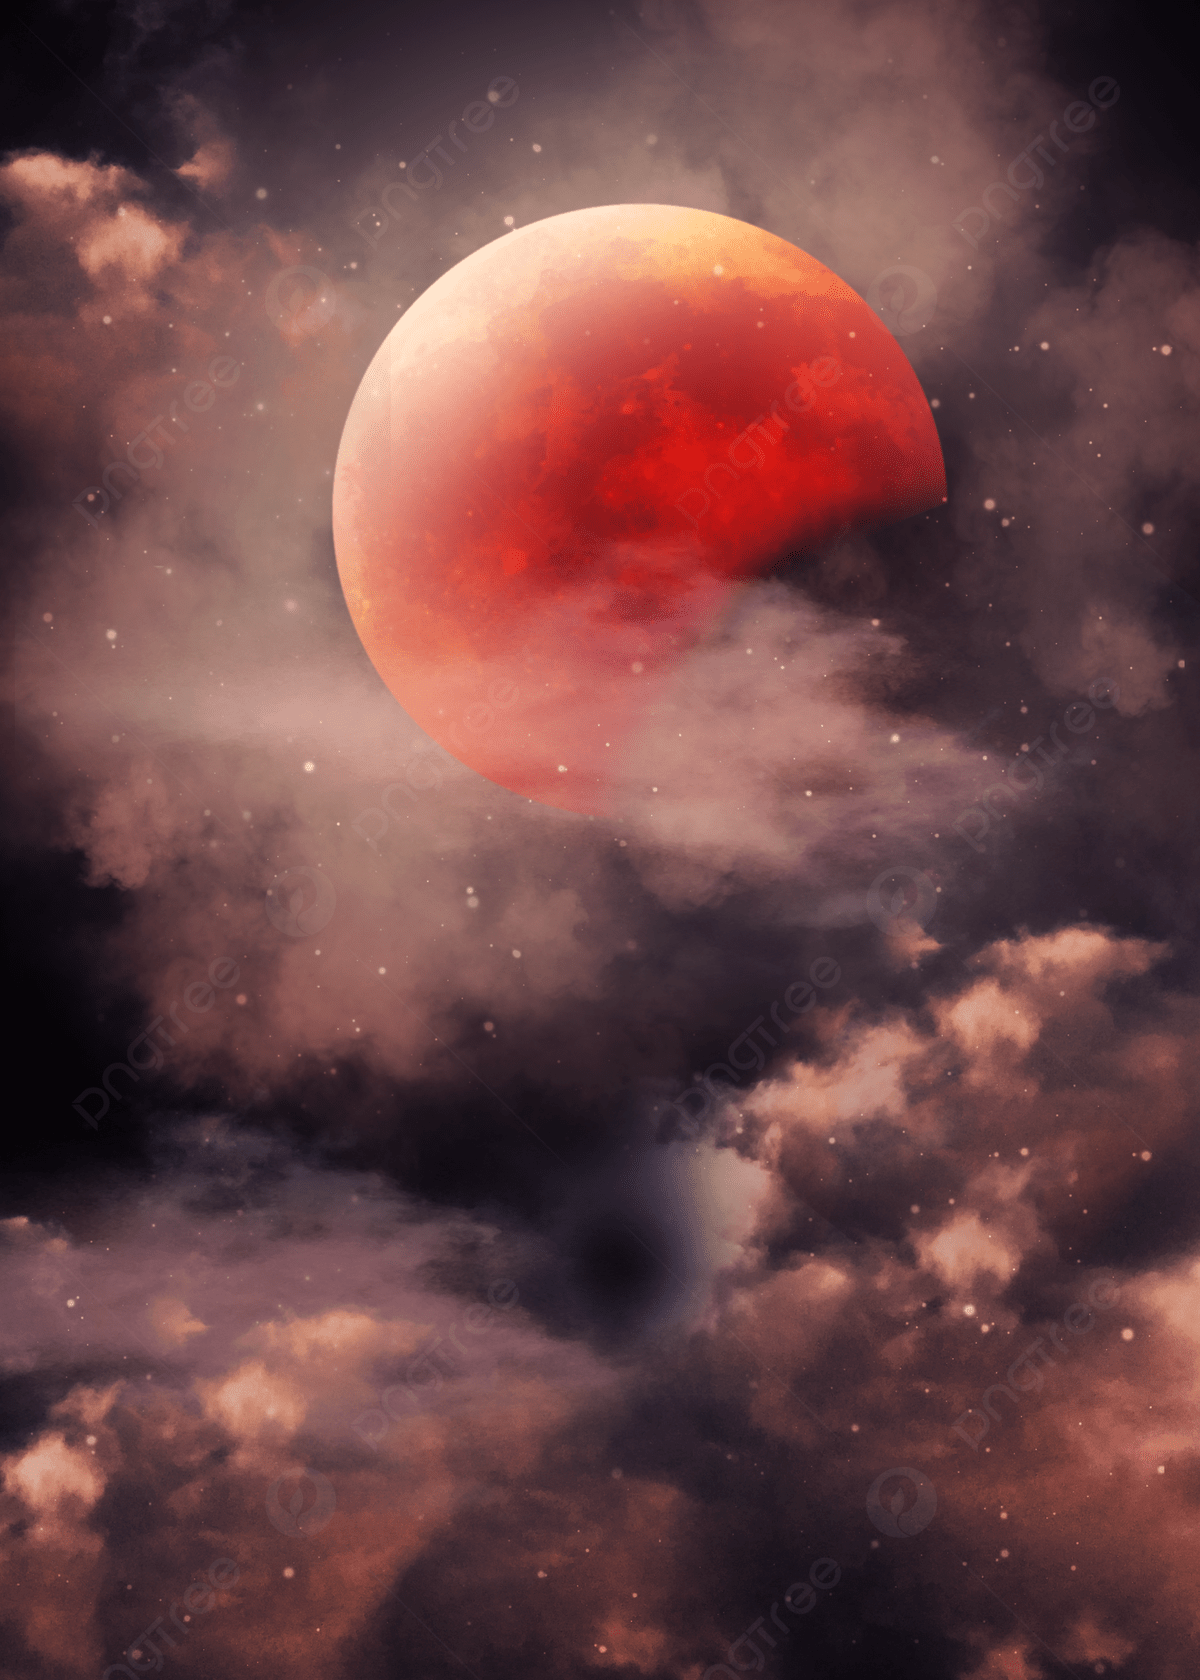 Red Night Sky Fire Clouds Moon Eclipse Clouds Night Scene Background Wallpaper Image For Free Download